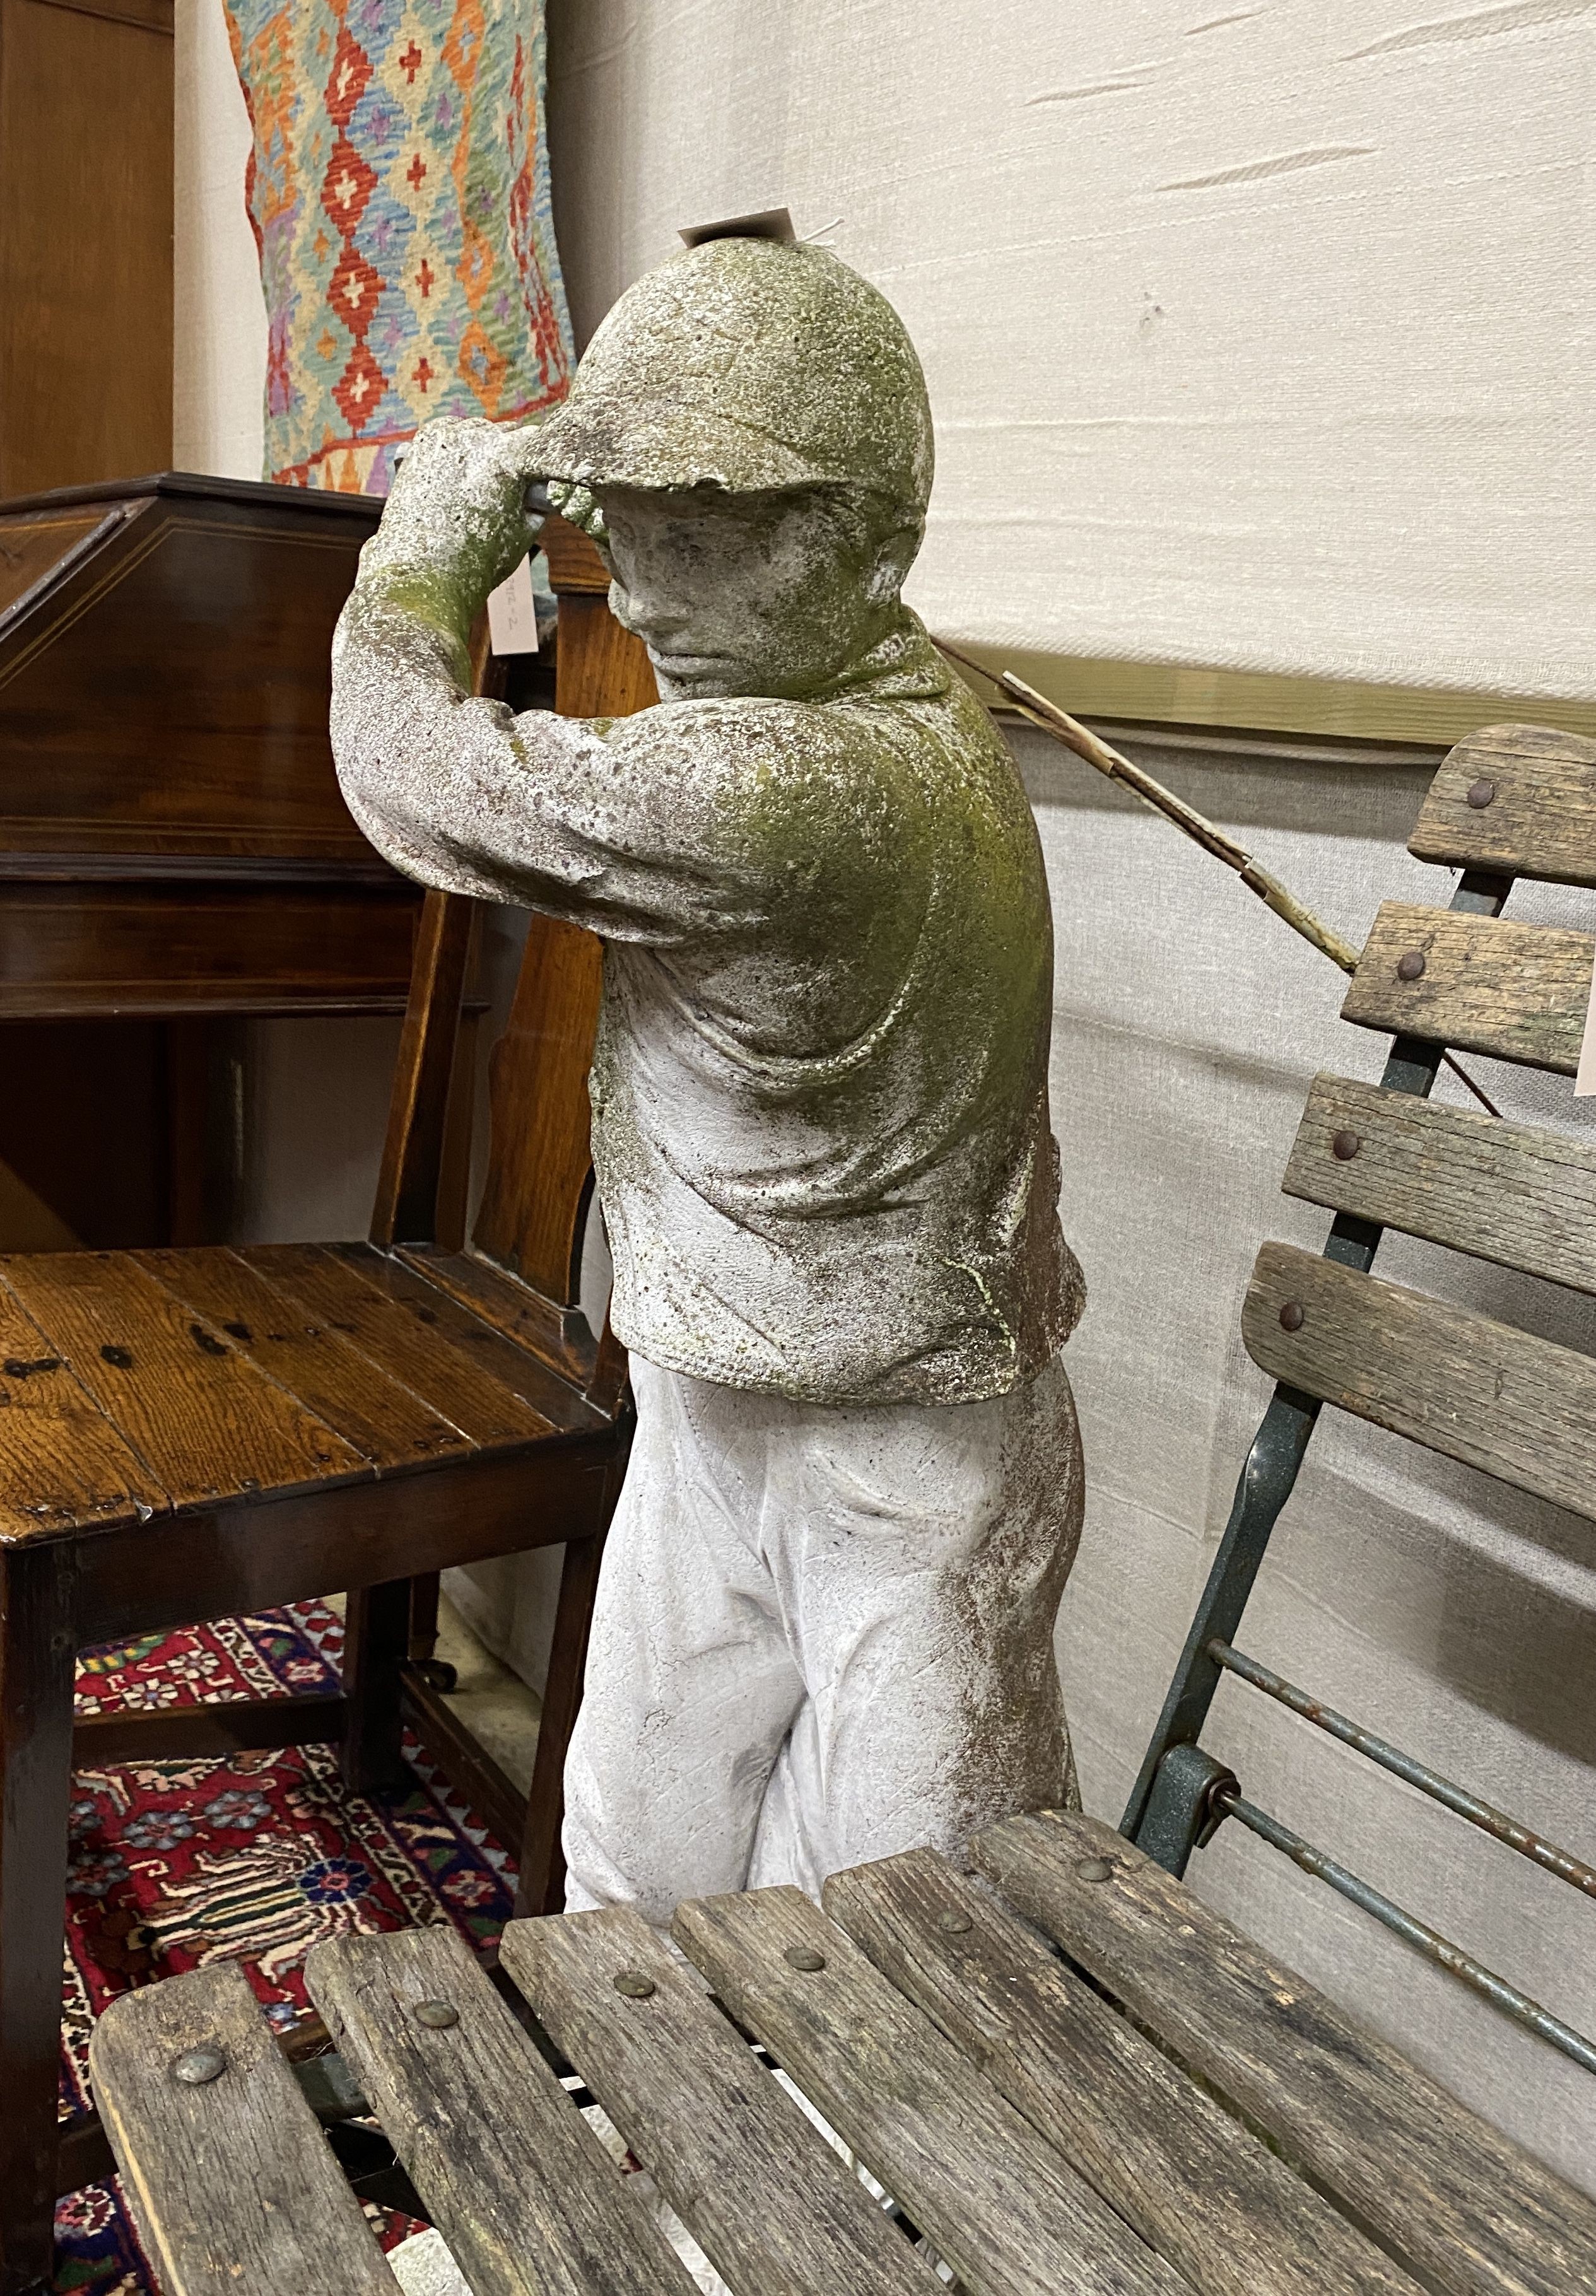 A reconstituted stone garden ornament modelled as a golfer, height 102cm